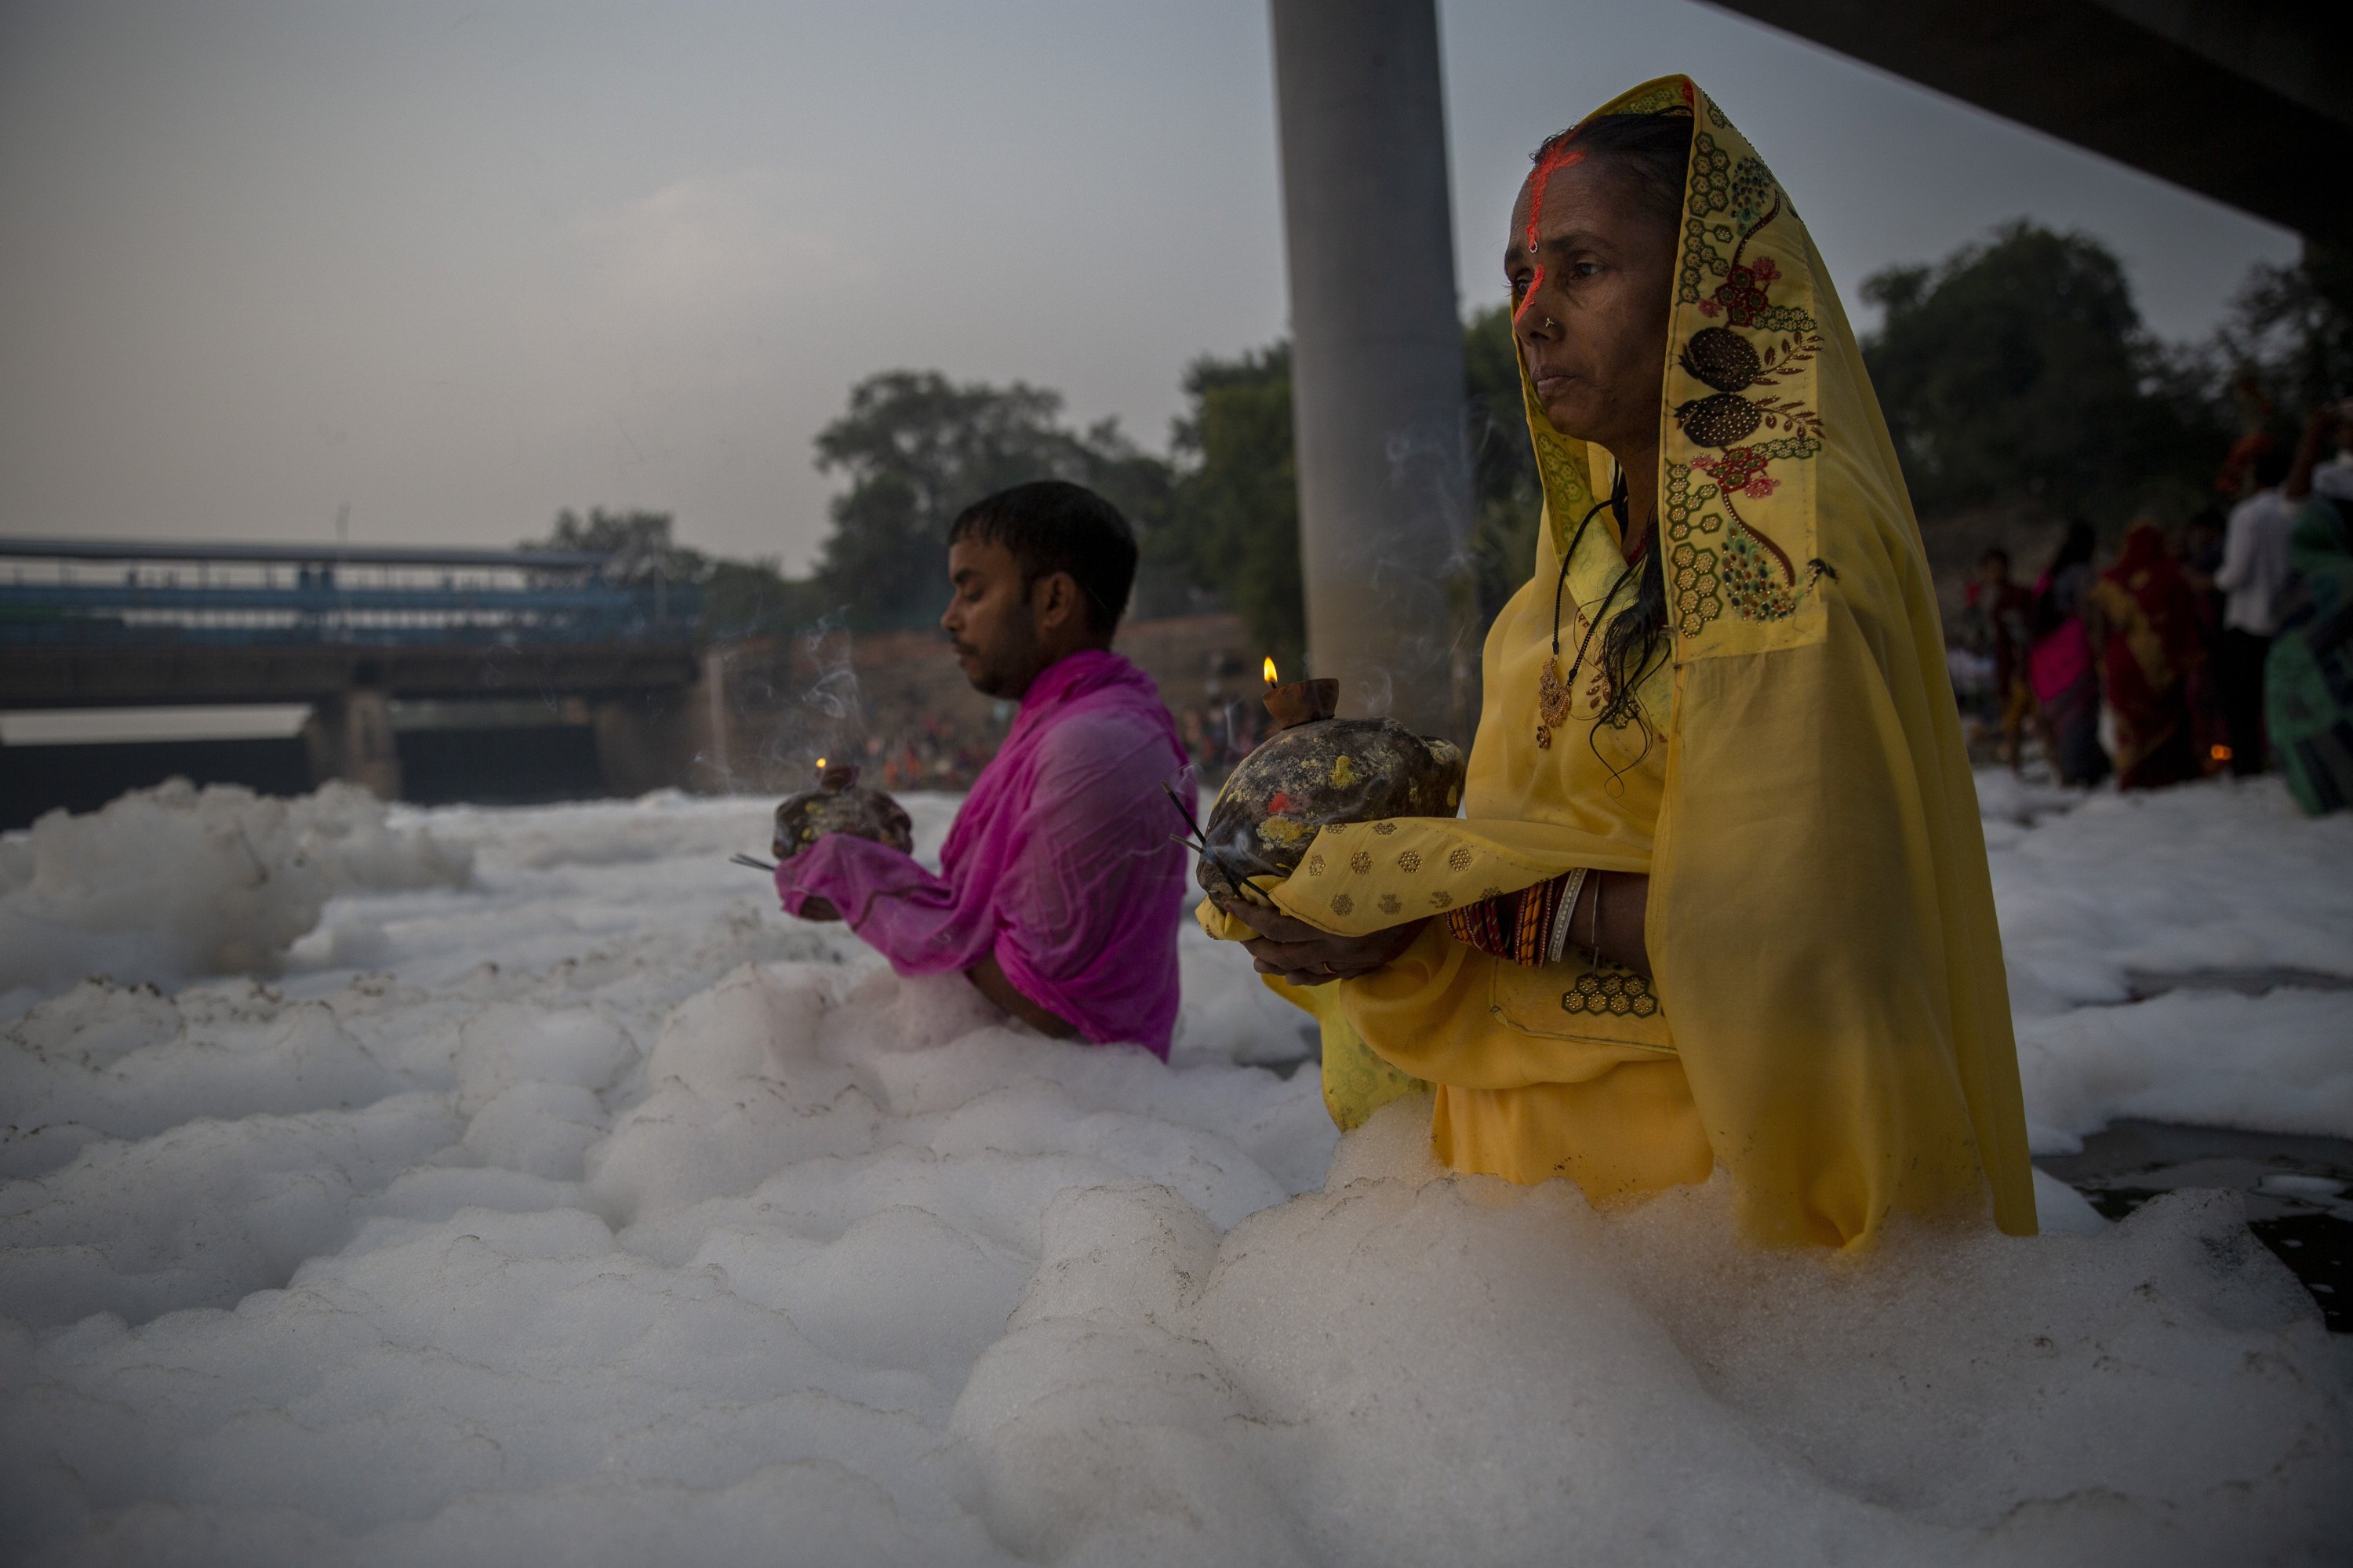 Indian Hindu devotees perform rituals in the Yamuna river, covered by chemical foam caused due to industrial and domestic pollution, during Chhath Puja festival in New Delhi, India, Nov. 10, 2021. (AP Photo)